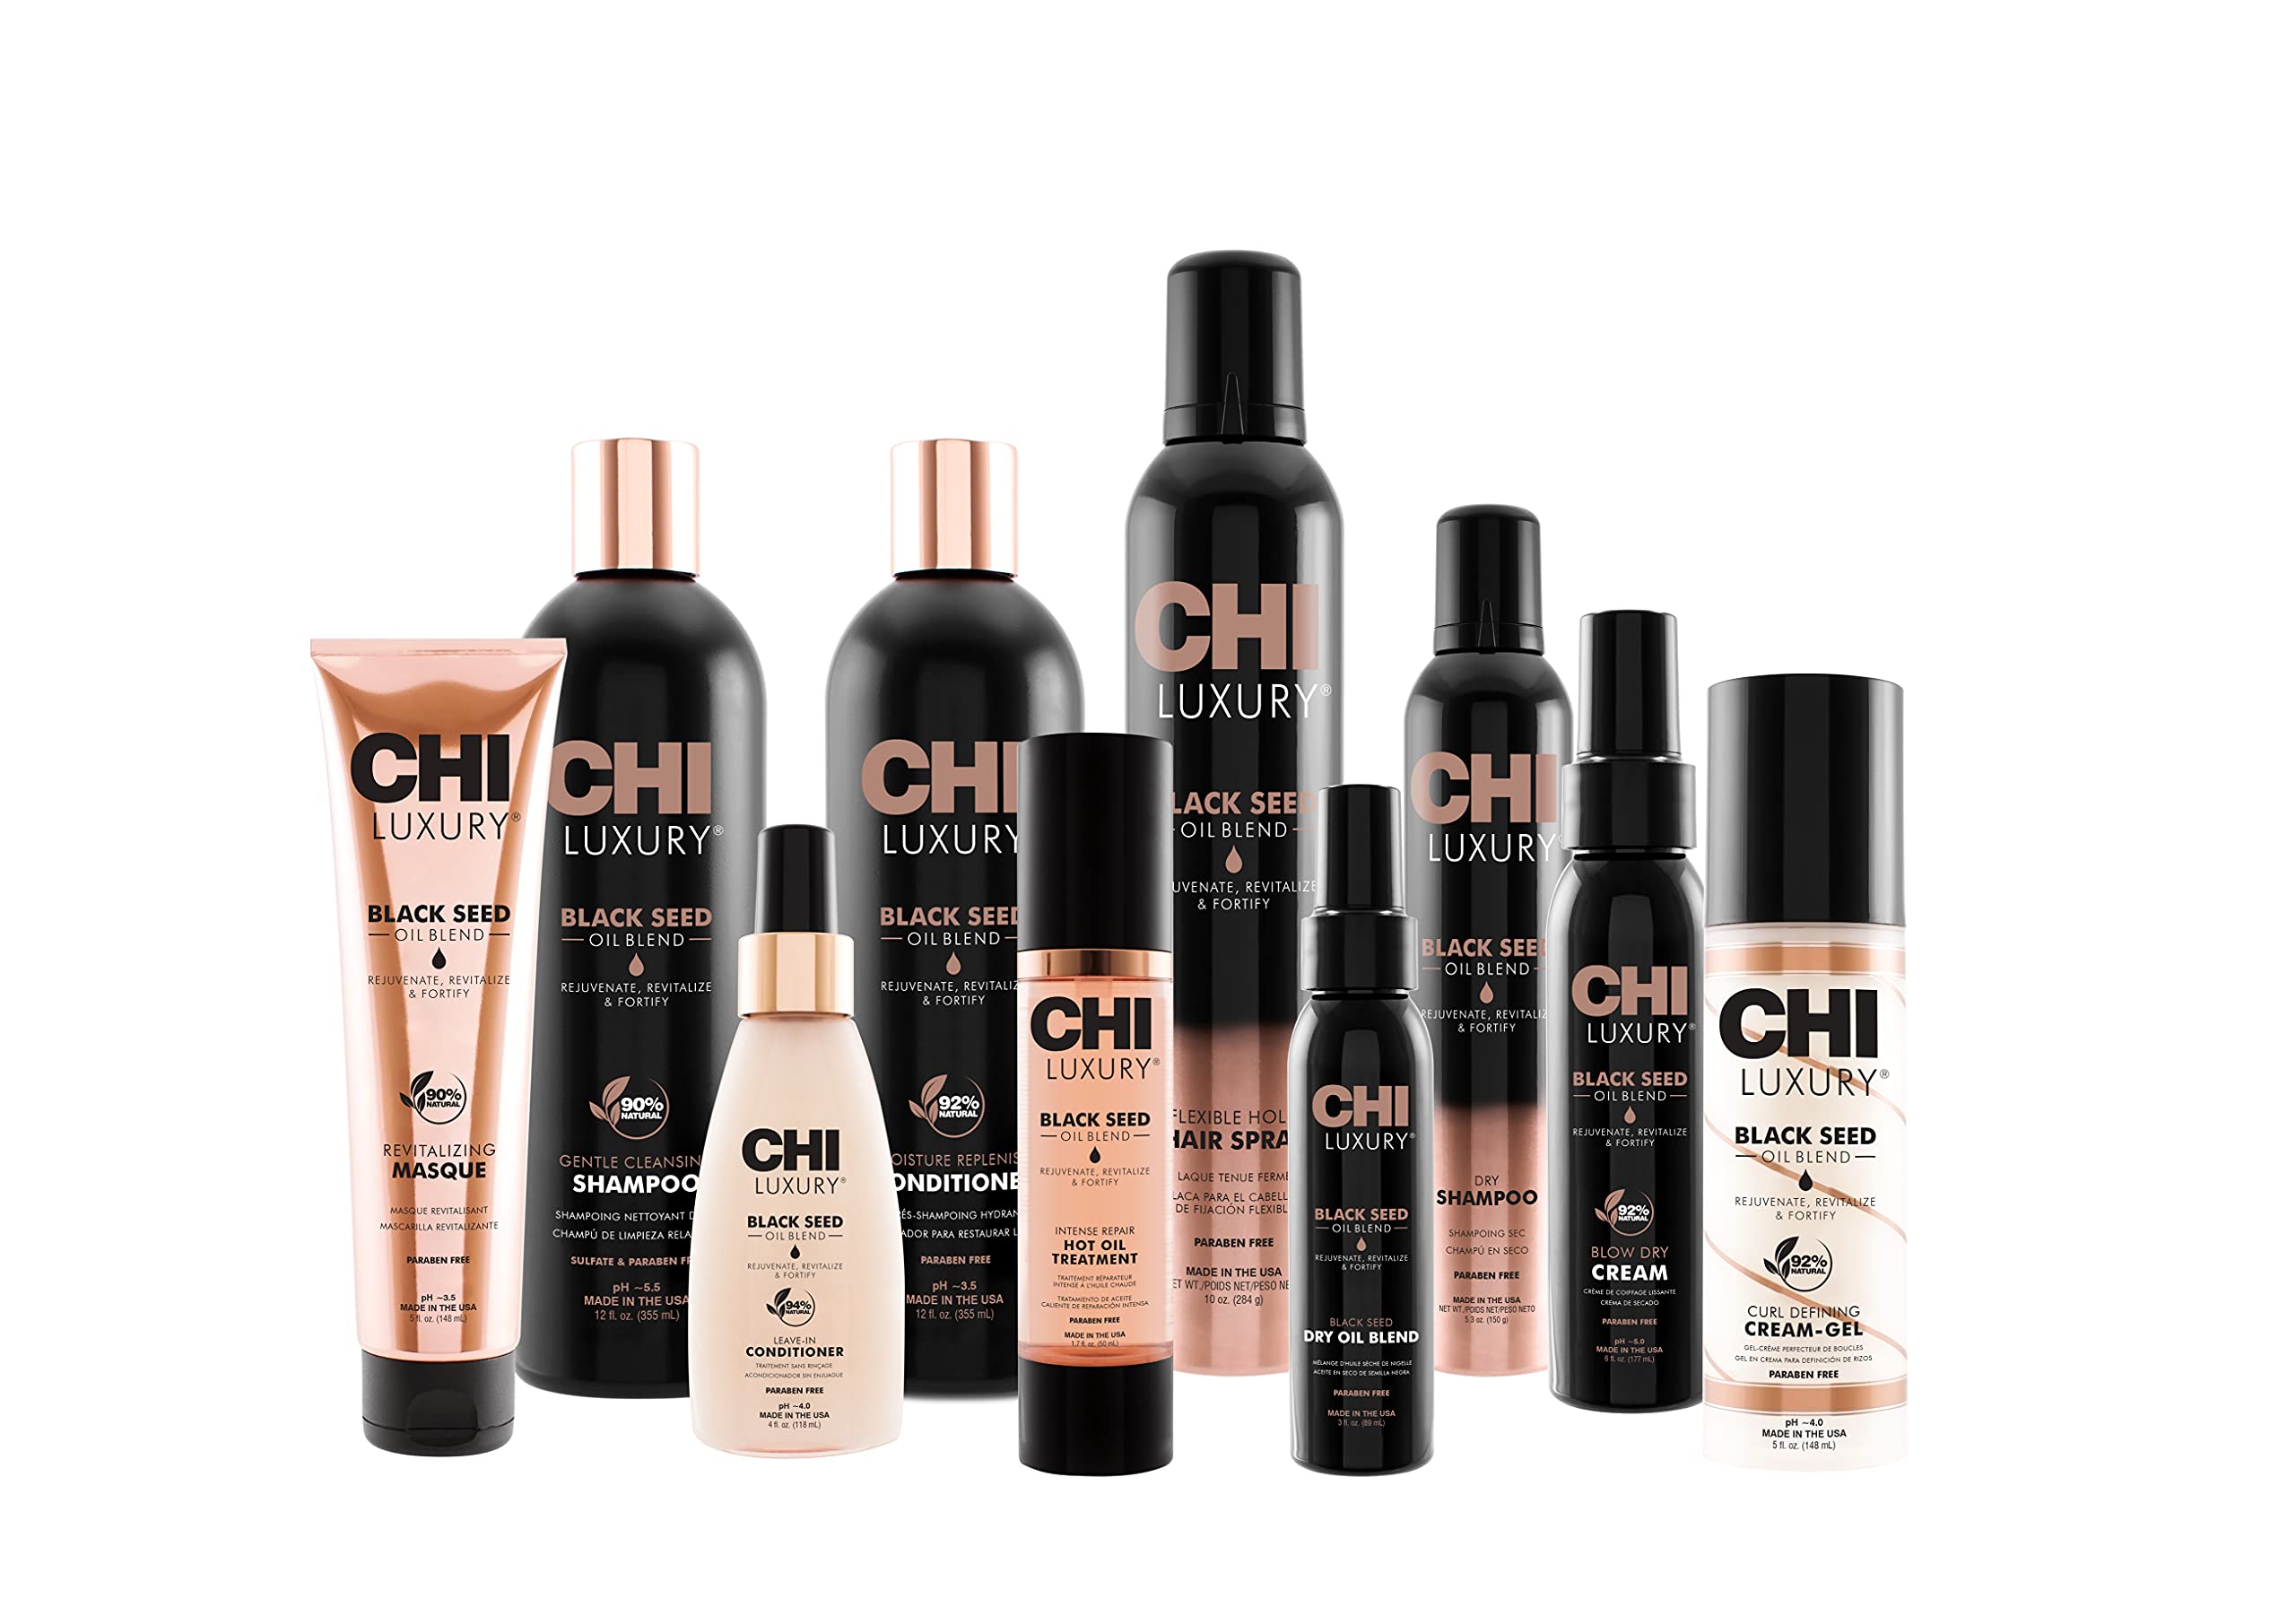 CHI Luxury Black Seed Oil Leave-In Conditioner, 4 Fl Oz